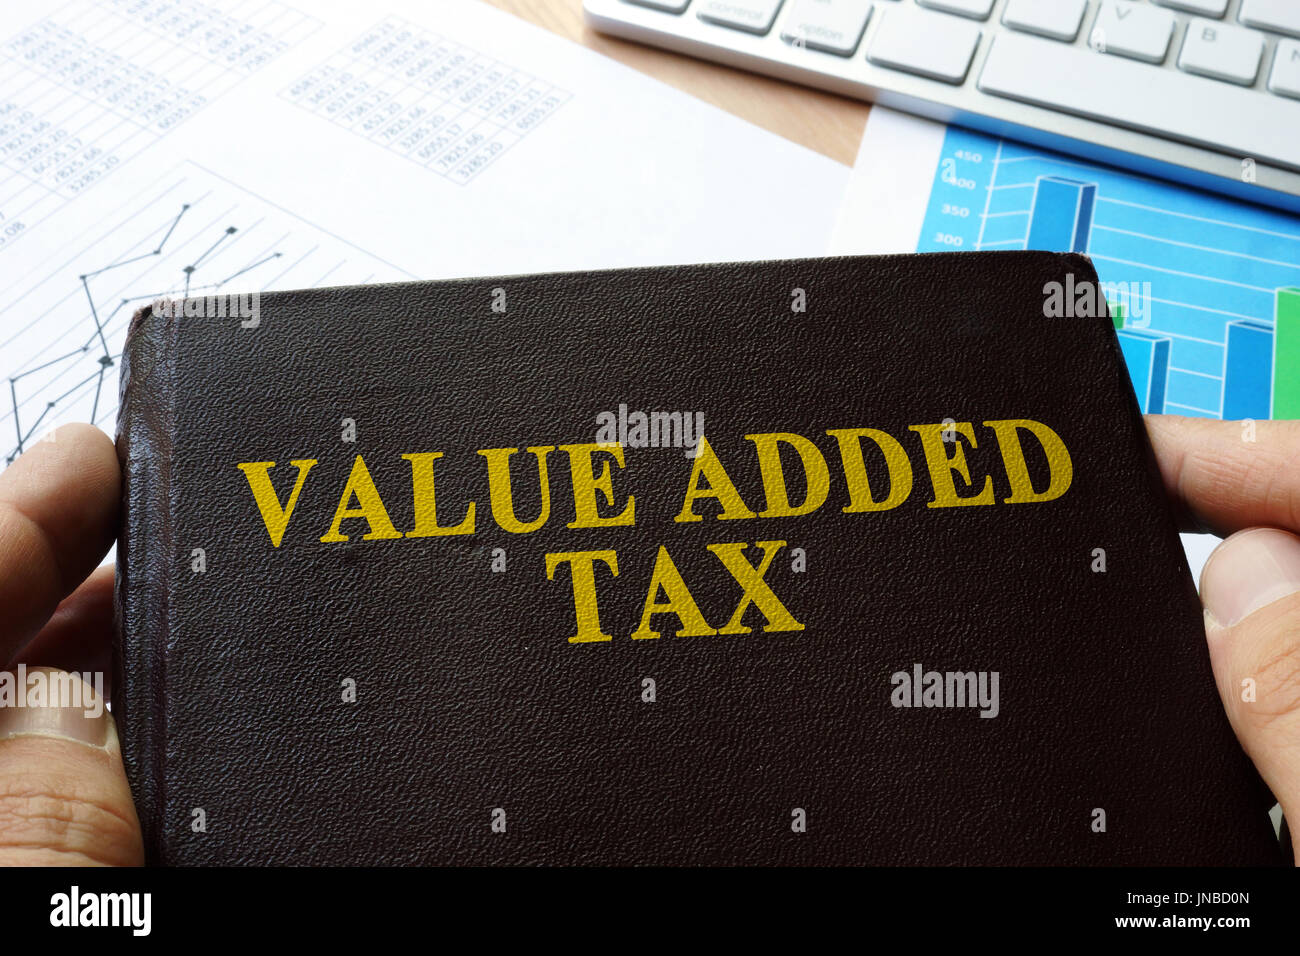 Value added tax VAT written on a front of book. Stock Photo